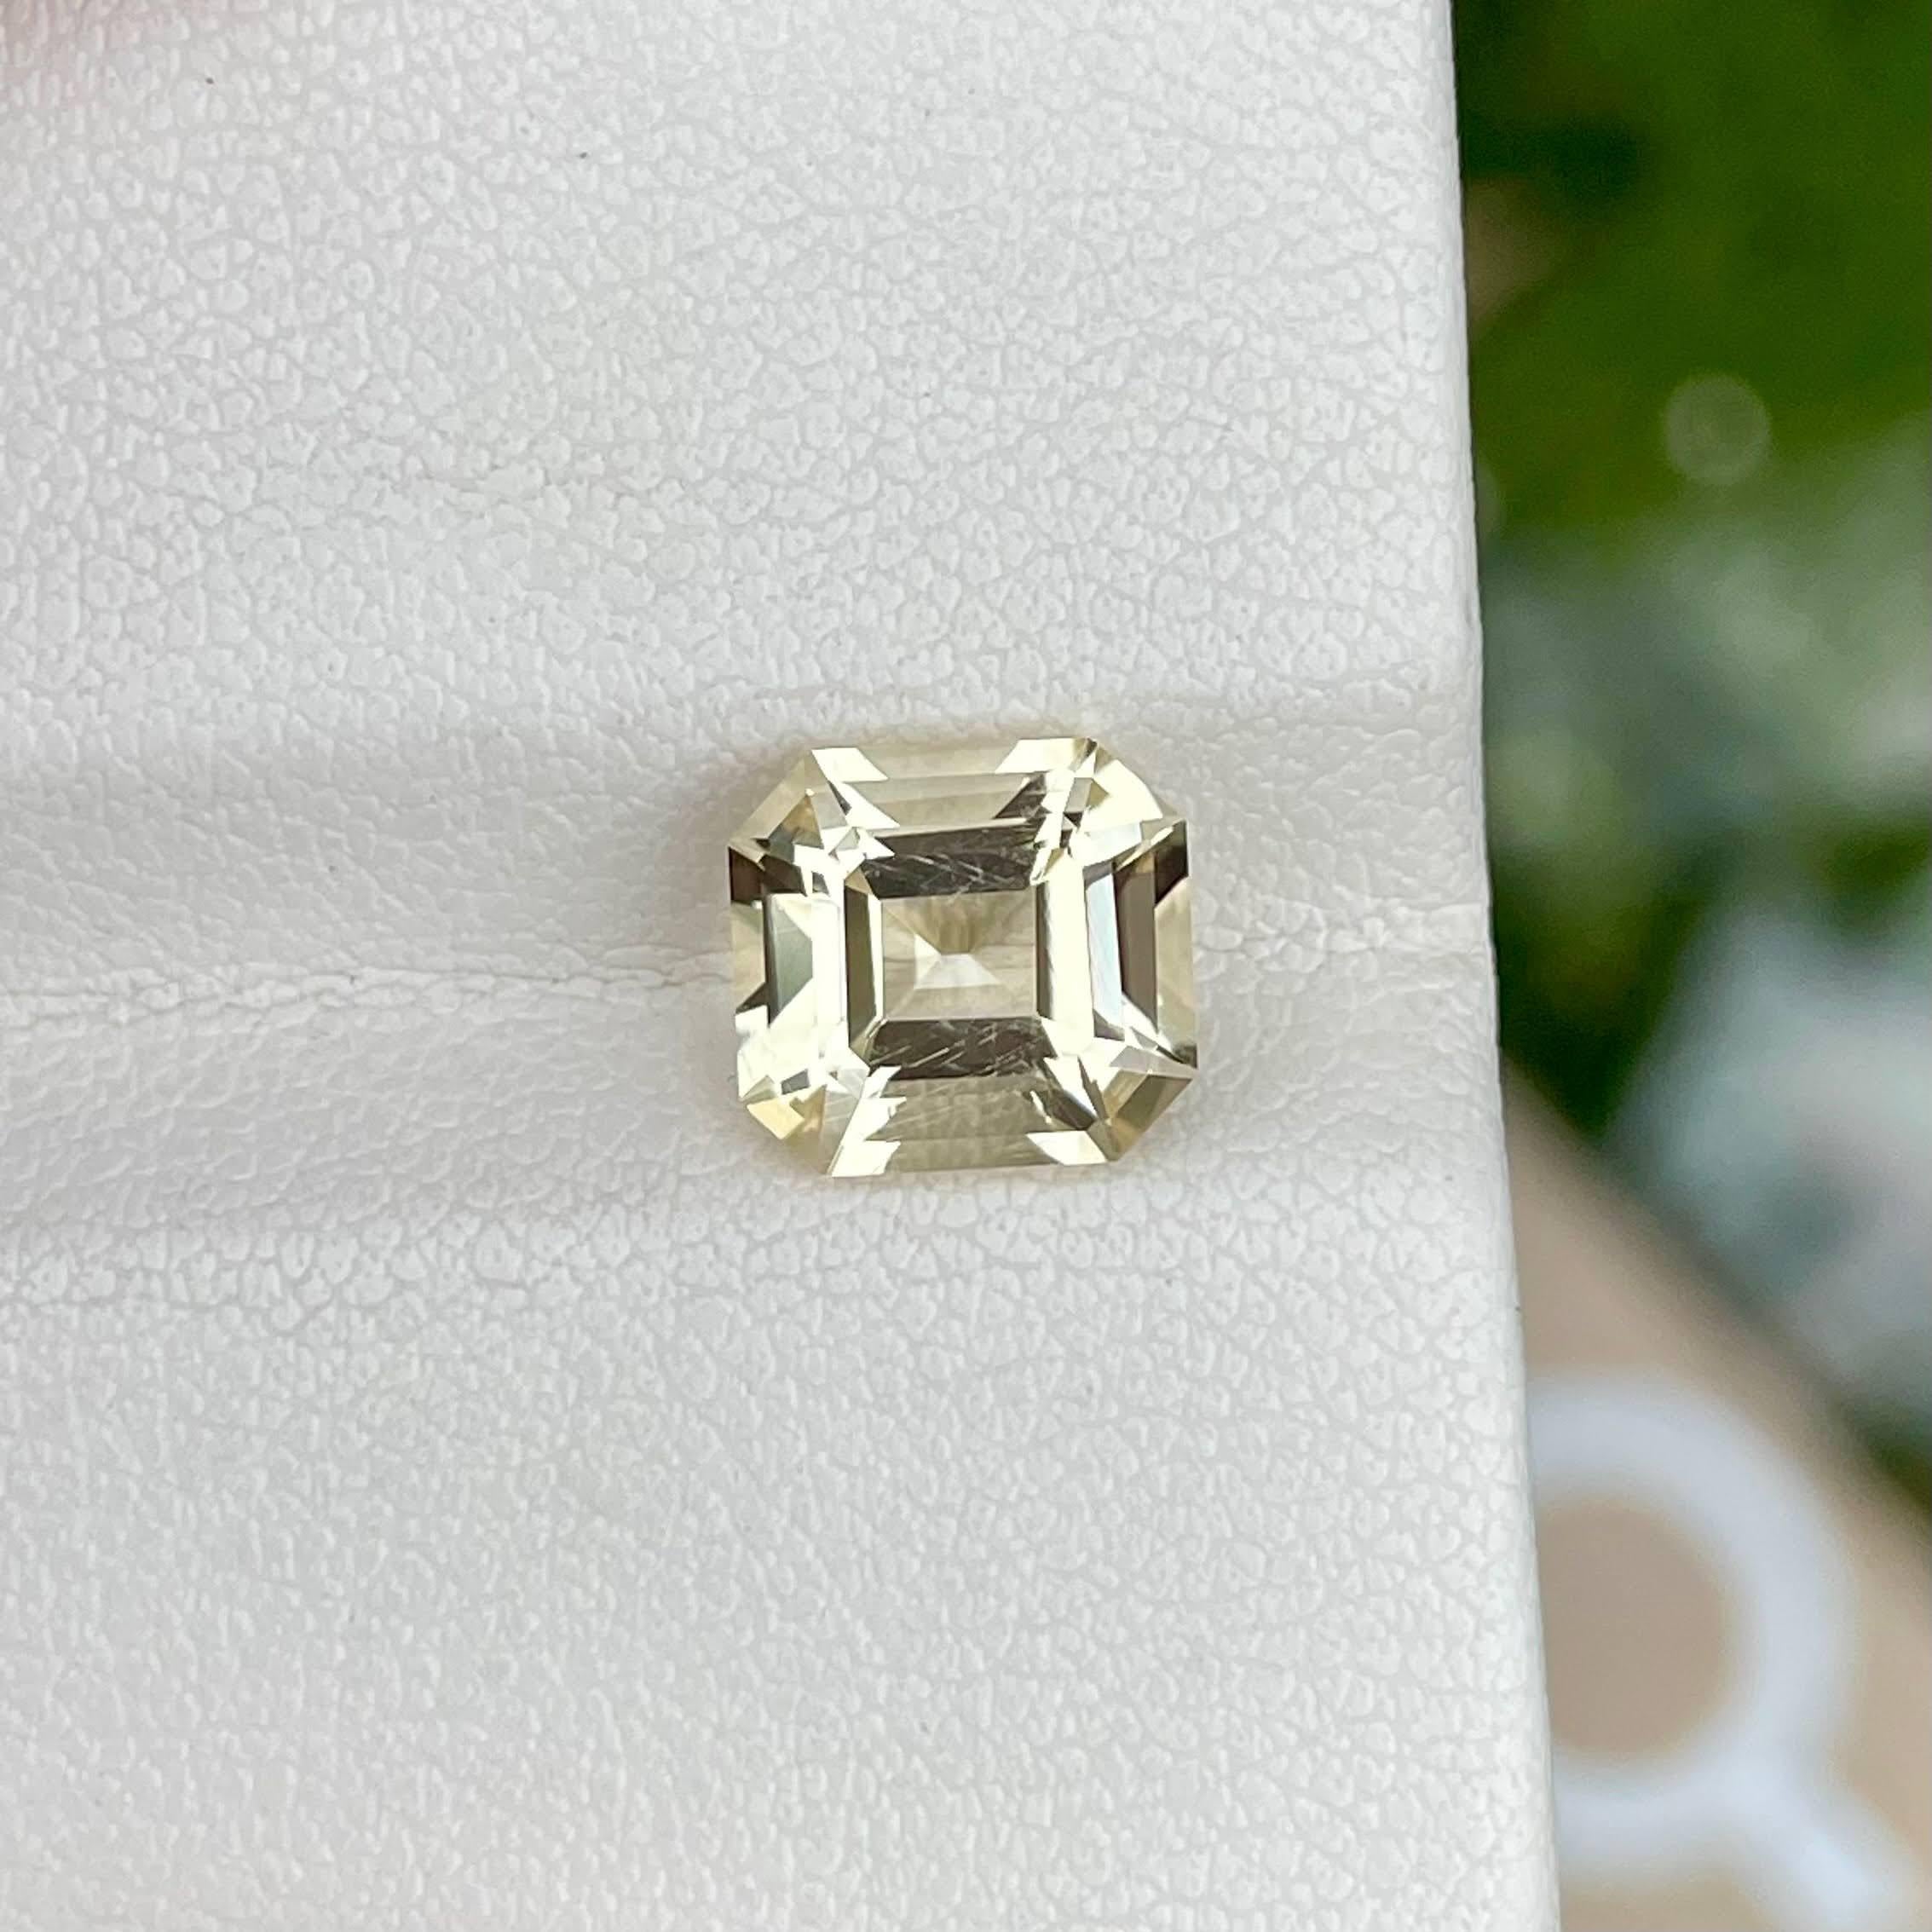 Weight 2.55 carats 
Dimensions 8.6x8.0x6.1 mm
Treatment none 
Origin Tanzania 
Clarity eye clean 
Shape octagon 
Cut Asscher 



The 2.55 carats Light Yellow Scapolite Stone, crafted into a asscher cut, emanates a gentle and warm aura, reminiscent